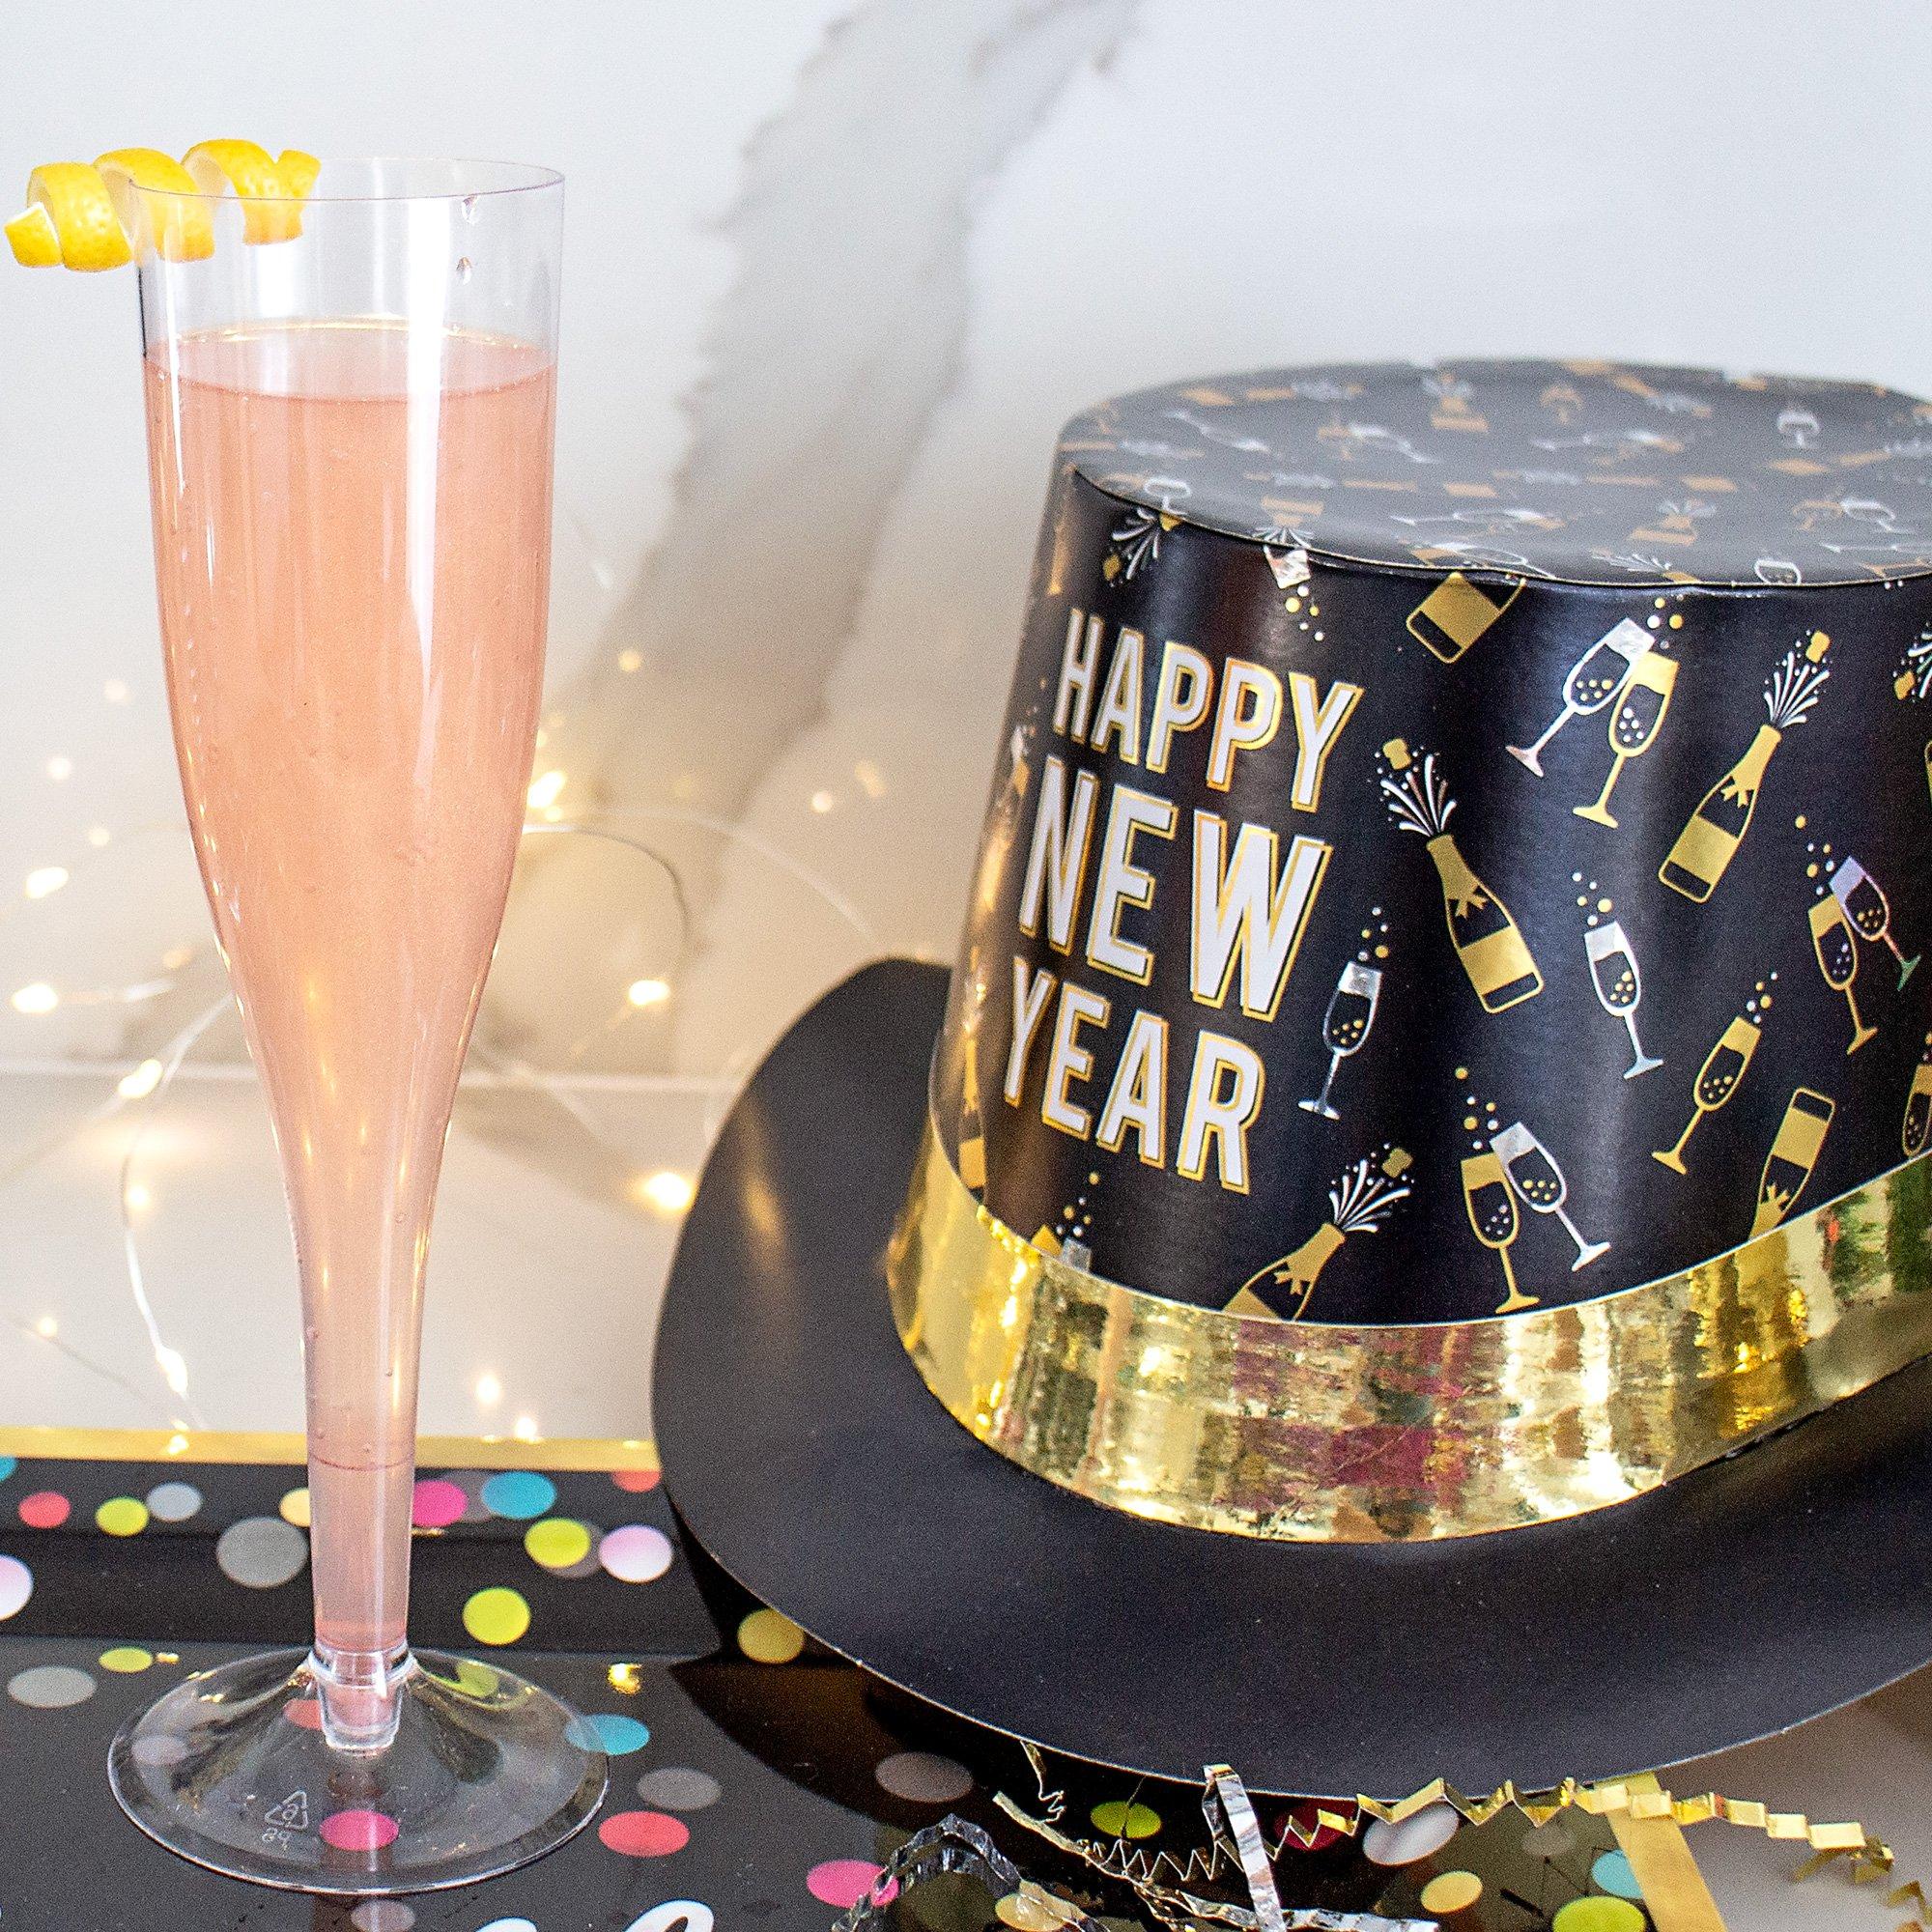 Bubbly This Way New Year's Eve Top Hat